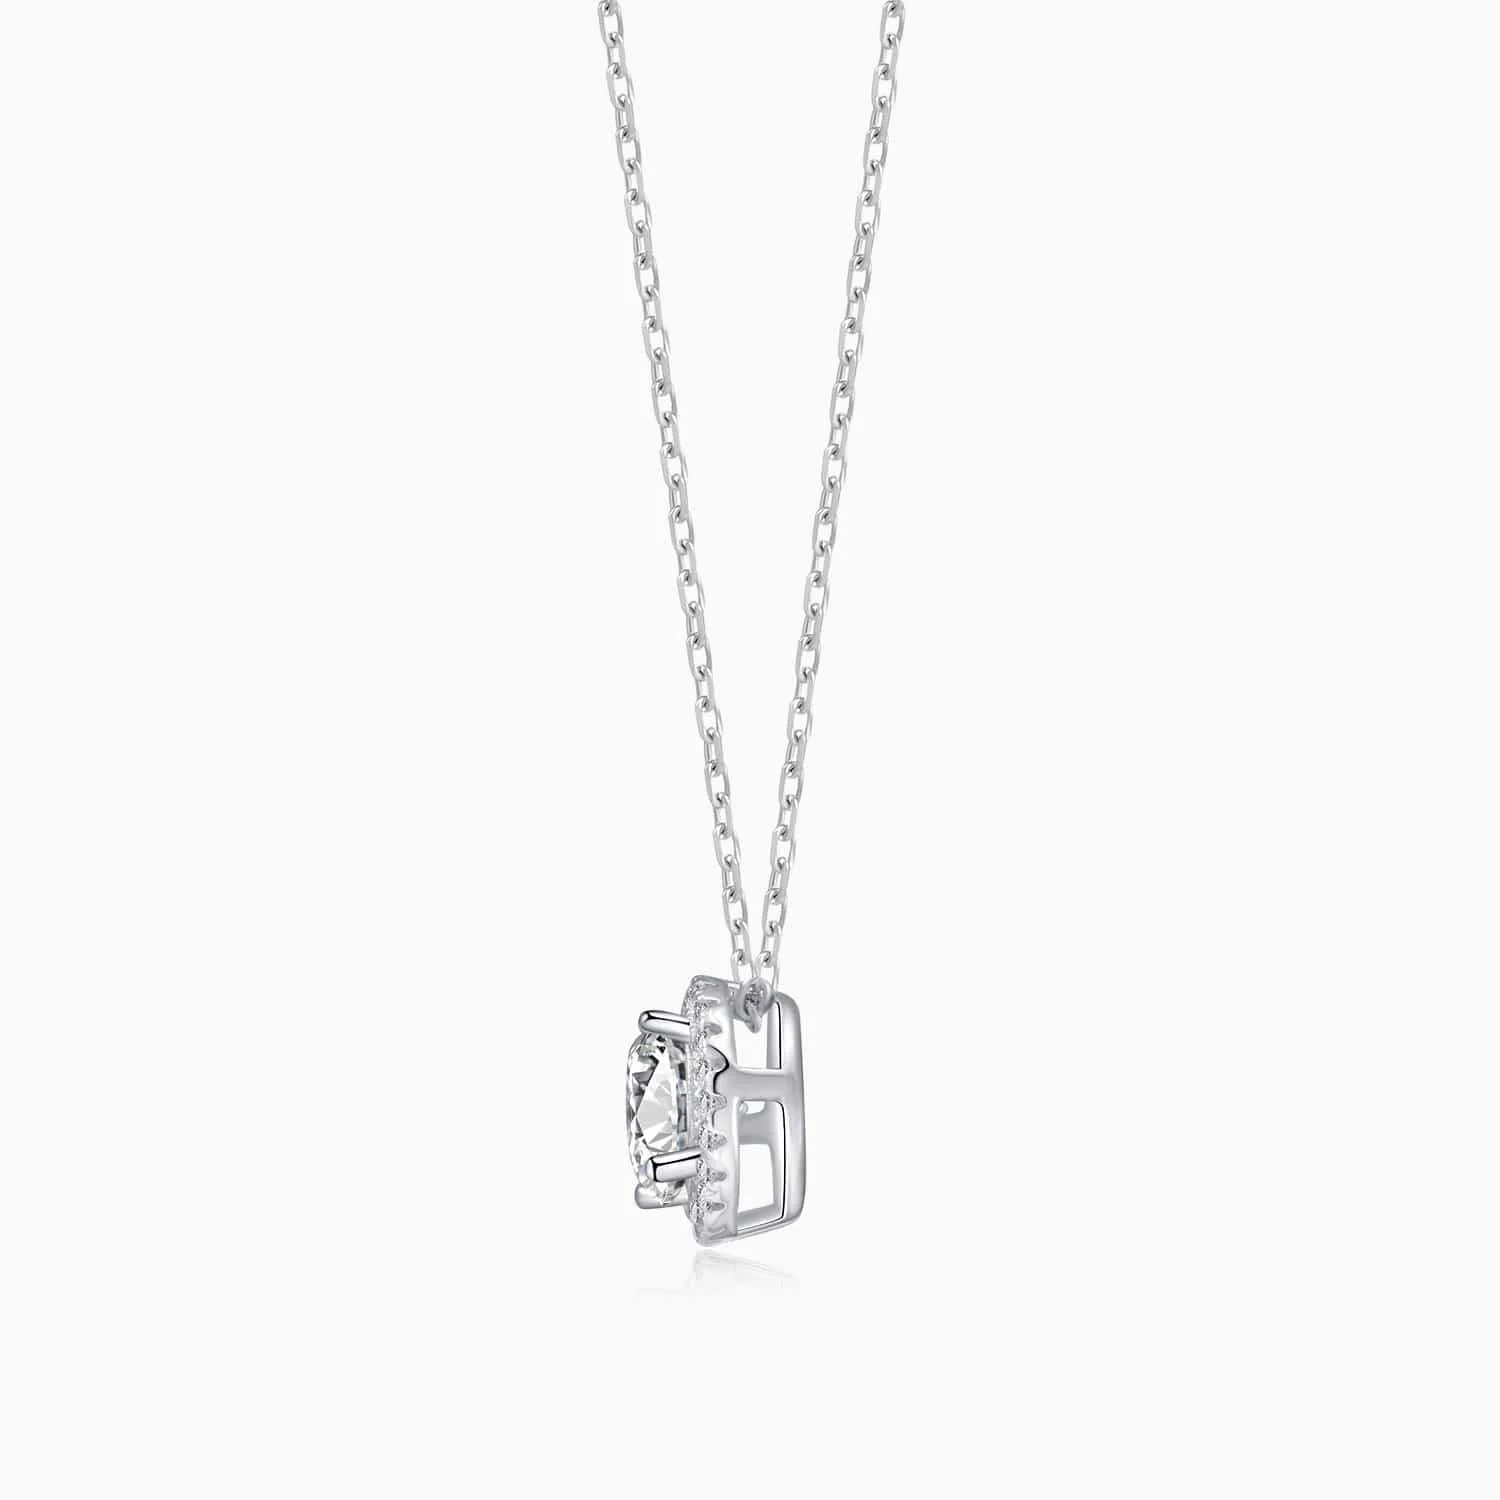 Lane Woods 925 Silver Halo Solitaire Round Moissanite Necklace